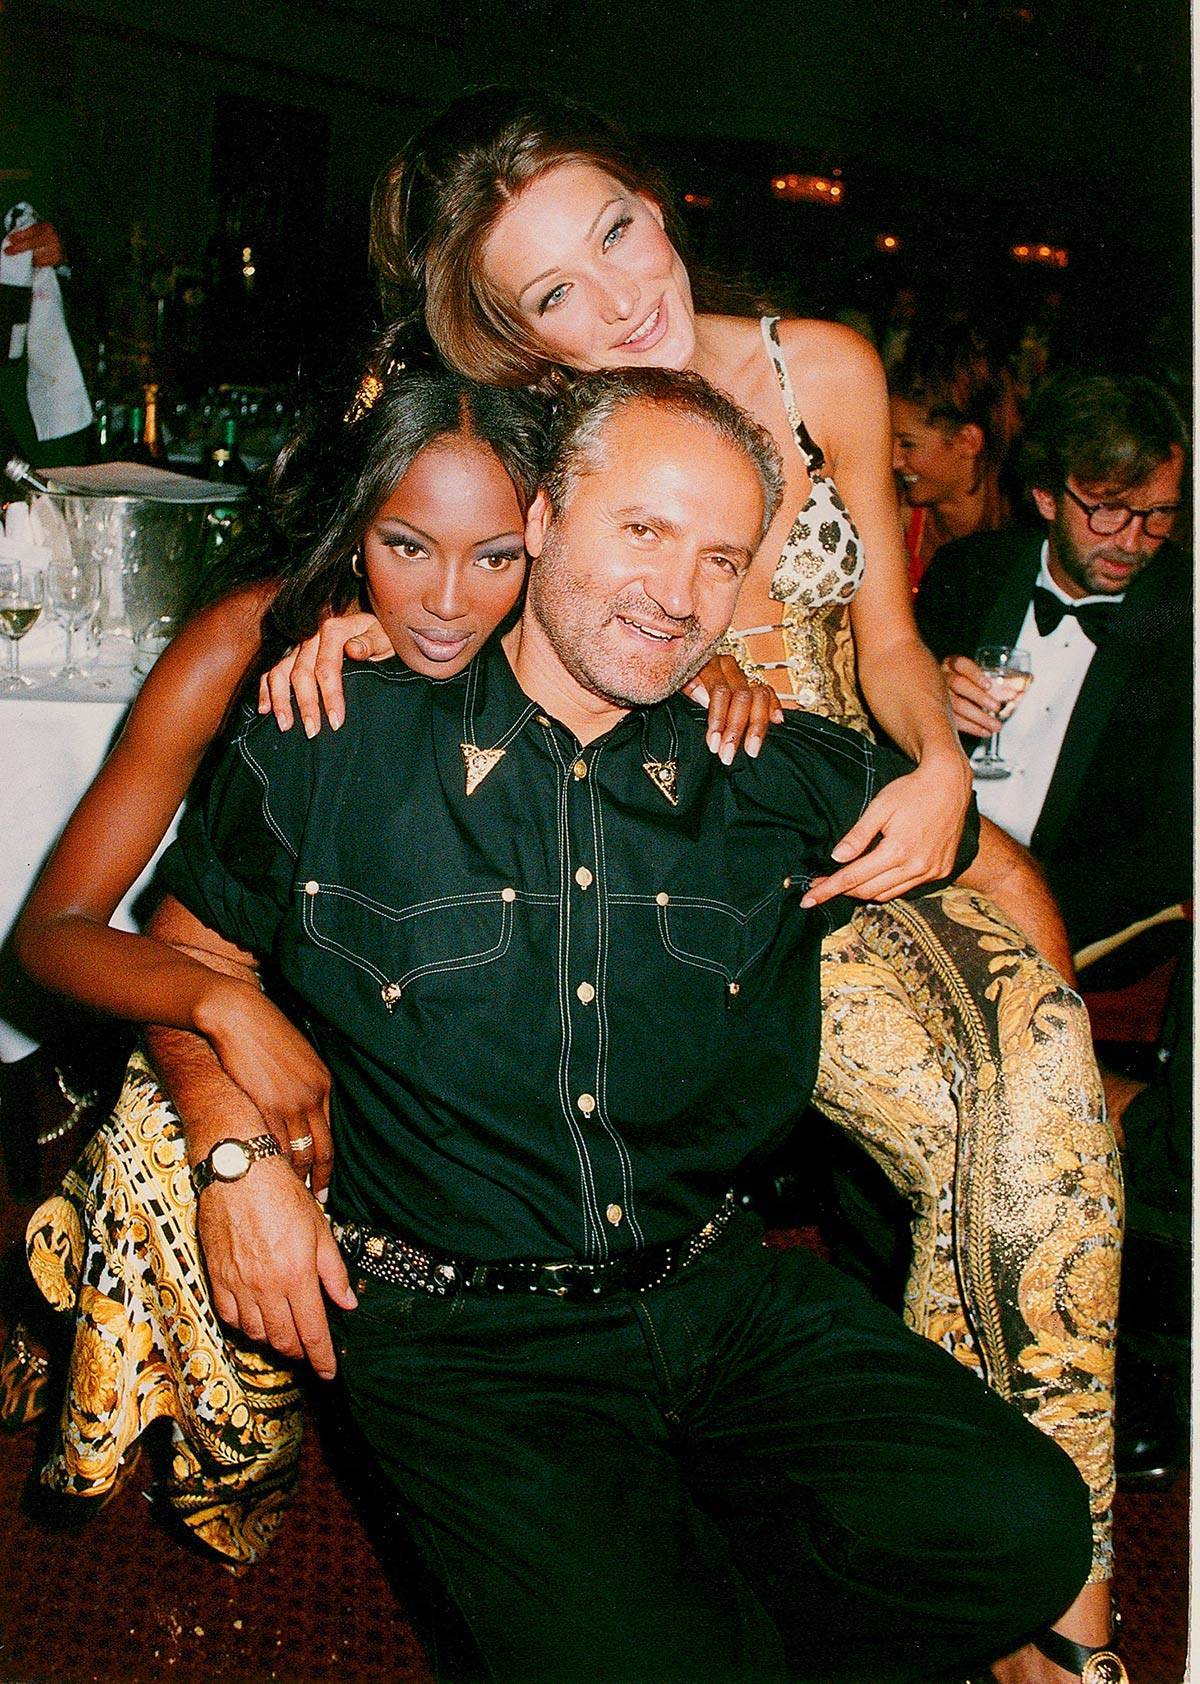 Carla Bruni,  Naomi Campbell i Gianni Versace, Londyn, 1992 (Fot. Getty Images)